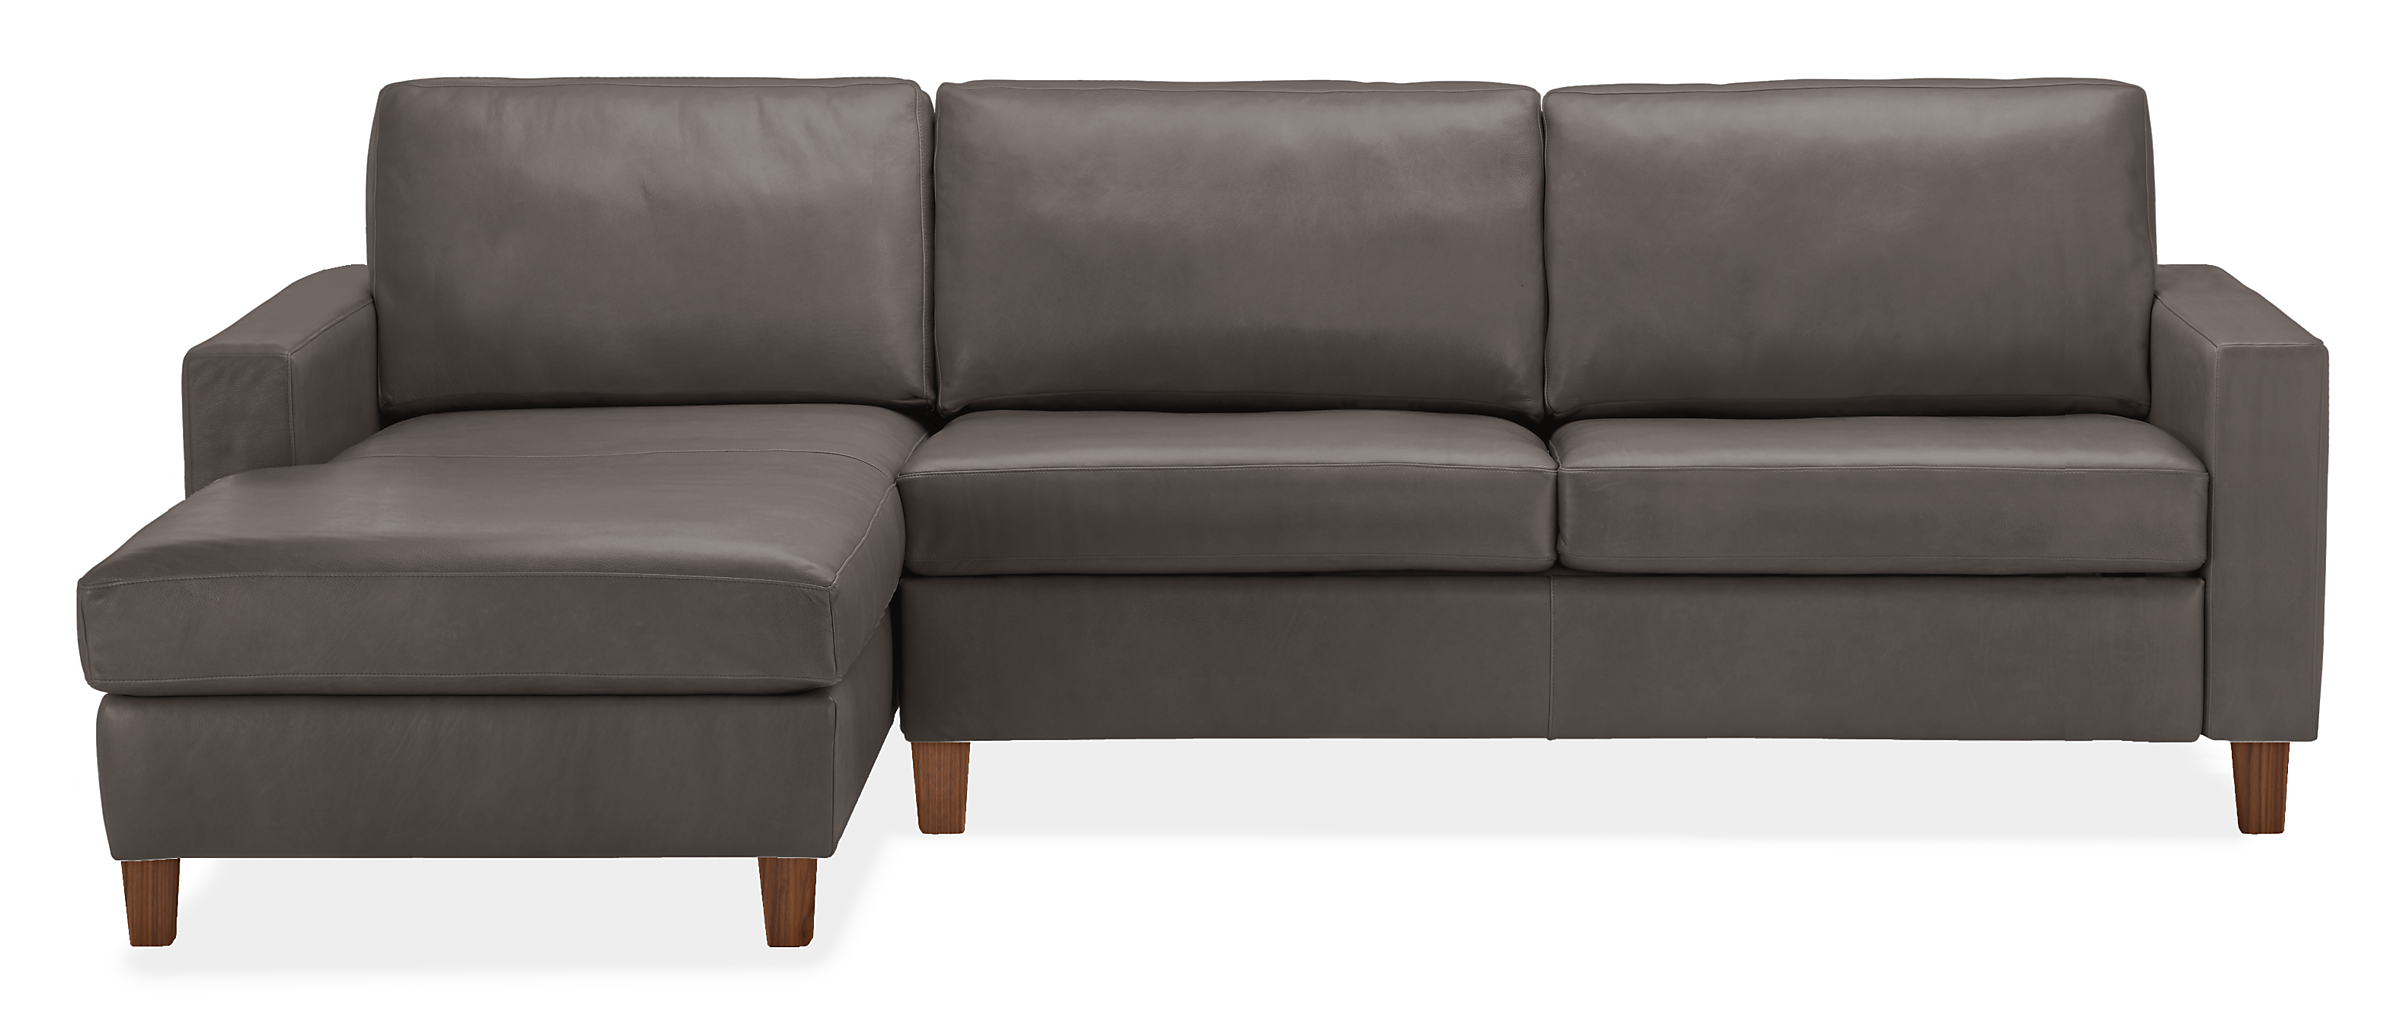 Berin Leather Day & Night Sleeper Sectional